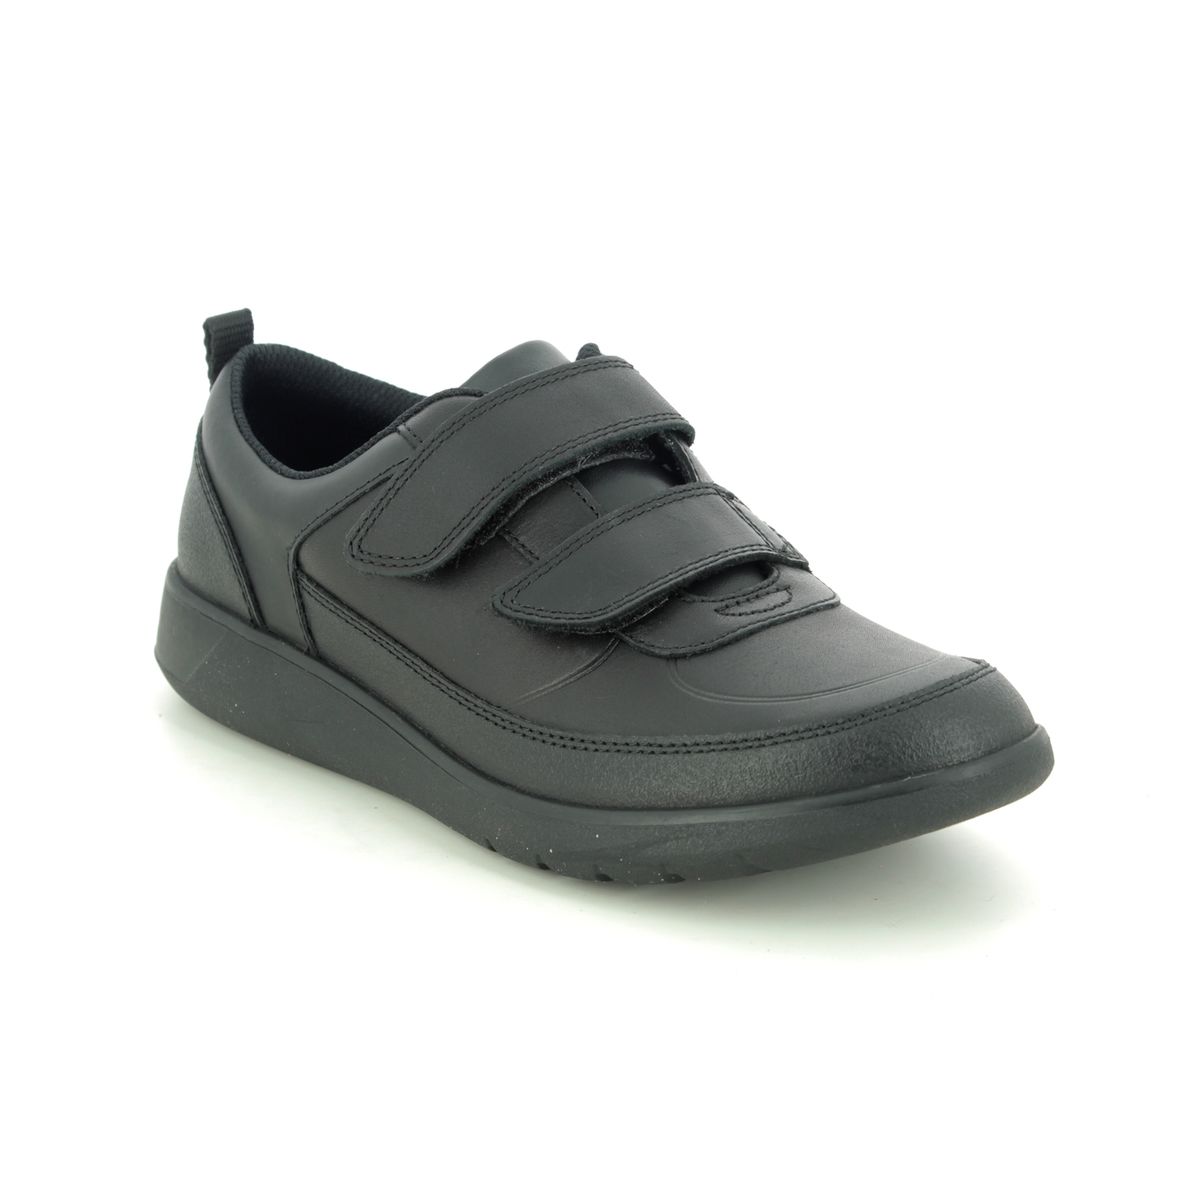 Clarks Scape Flare Y Black Leather Kids Boys Shoes 494097G In Size 6 In Plain Black Leather G Width Fitting For School For kids